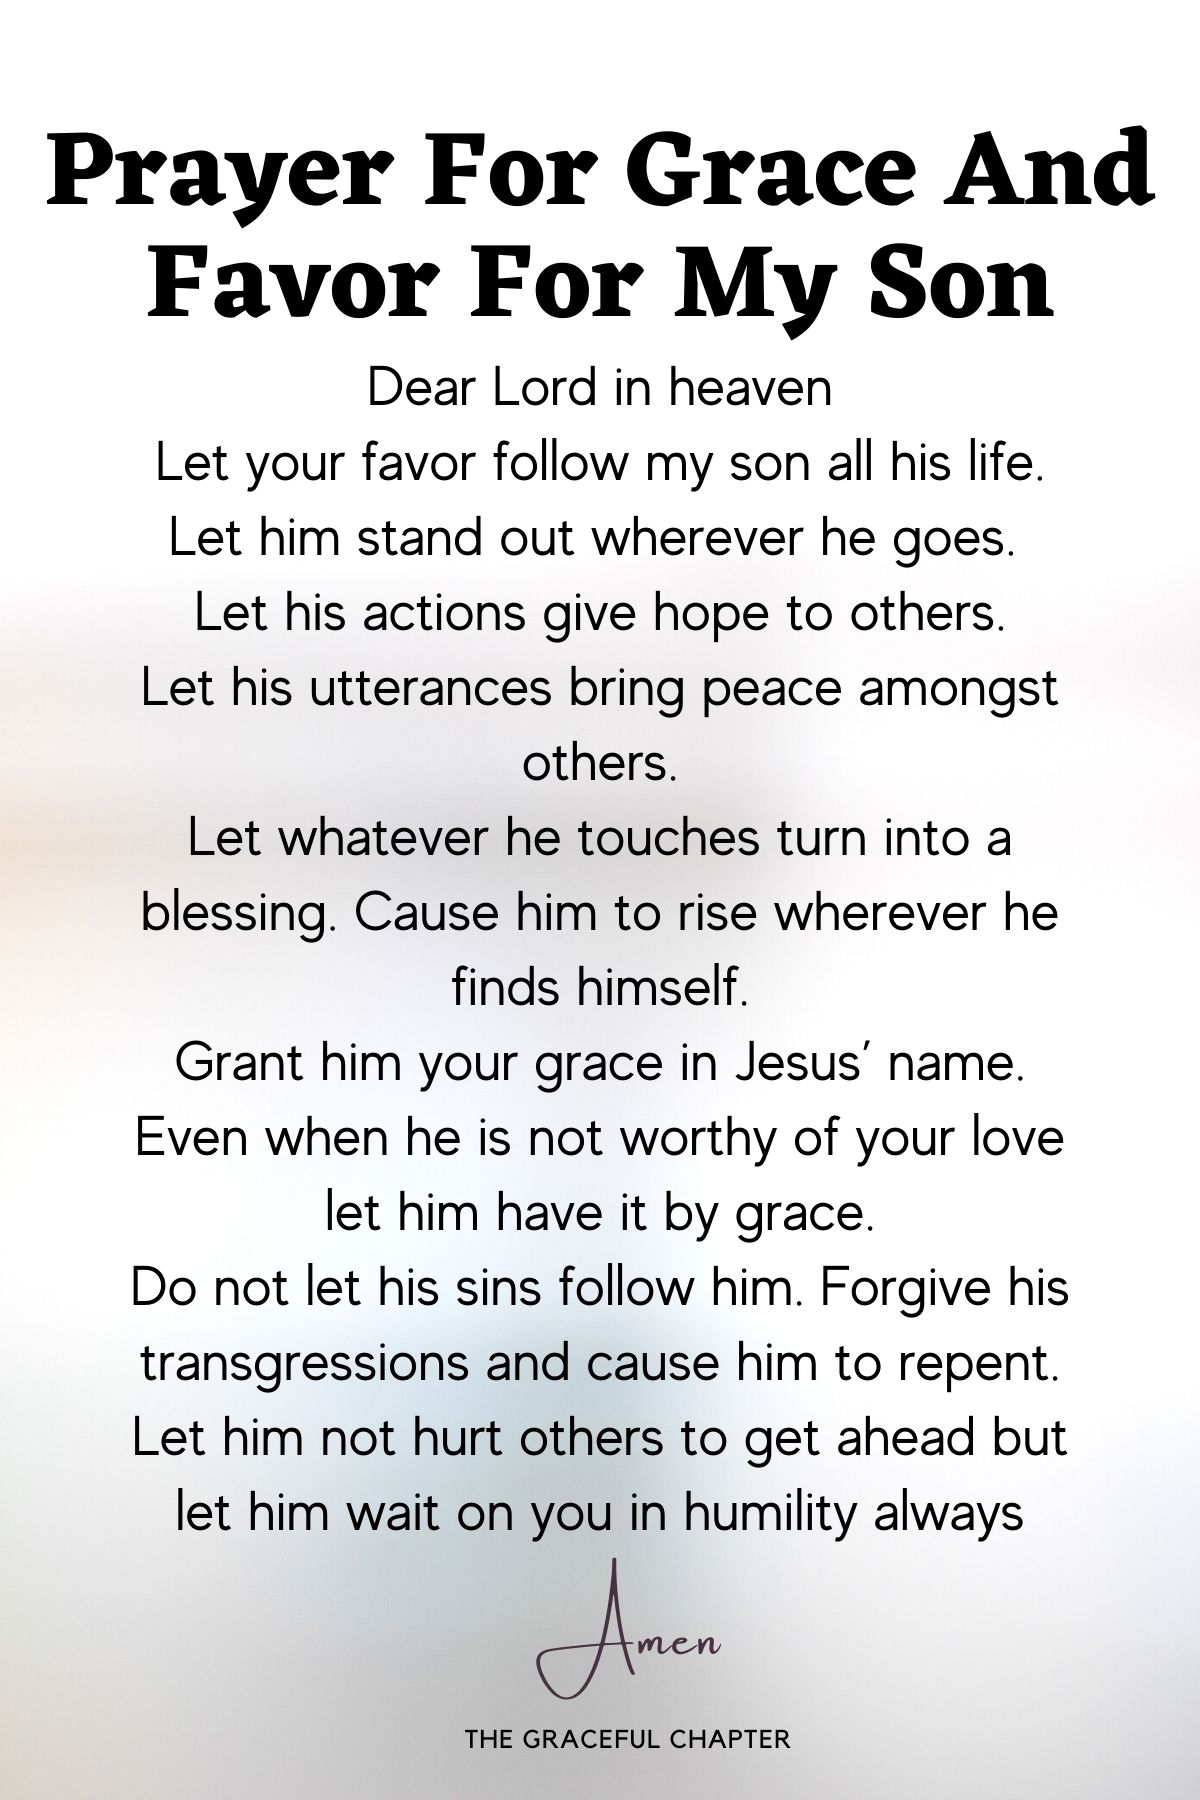 Prayer for grace and favor for my son - prayers for my son